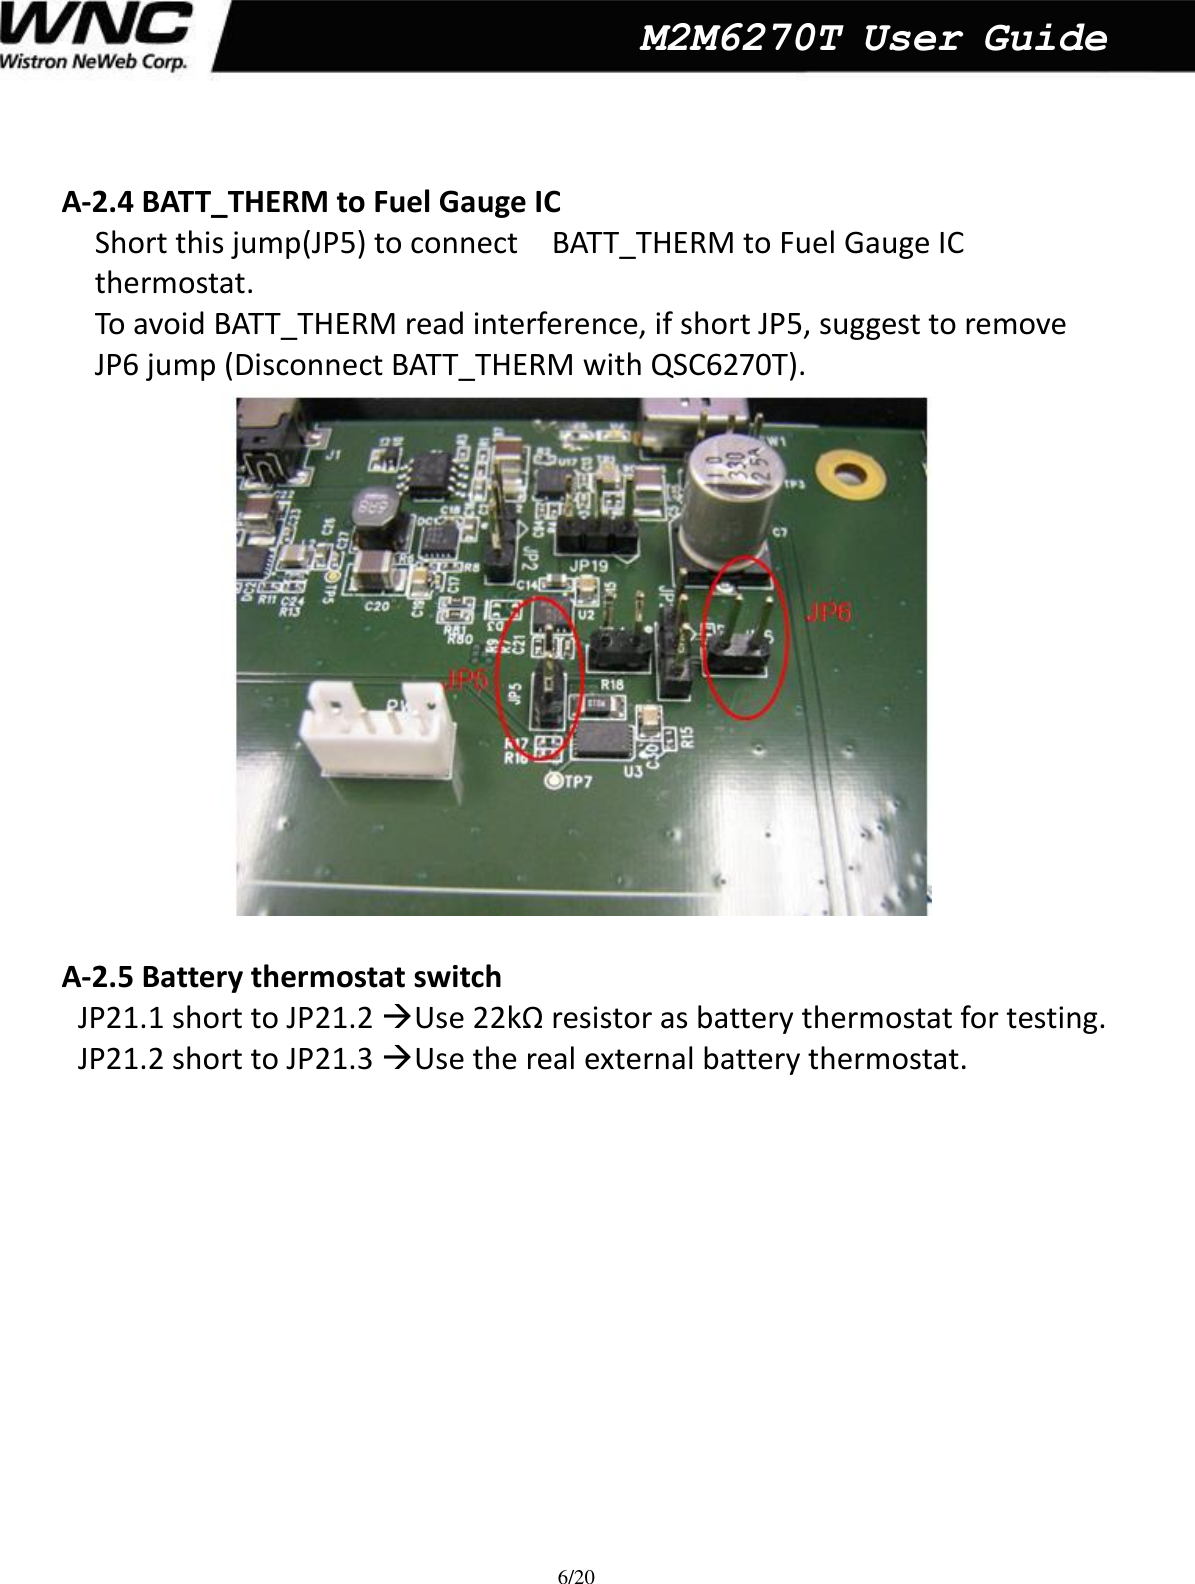  6/20  M2M6270T User Guide   A-2.4 BATT_THERM to Fuel Gauge IC   Short this jump(JP5) to connect    BATT_THERM to Fuel Gauge IC   thermostat. To avoid BATT_THERM read interference, if short JP5, suggest to remove   JP6 jump (Disconnect BATT_THERM with QSC6270T).         A-2.5 Battery thermostat switch   JP21.1 short to JP21.2 Use 22kΩ resistor as battery thermostat for testing.   JP21.2 short to JP21.3 Use the real external battery thermostat.       